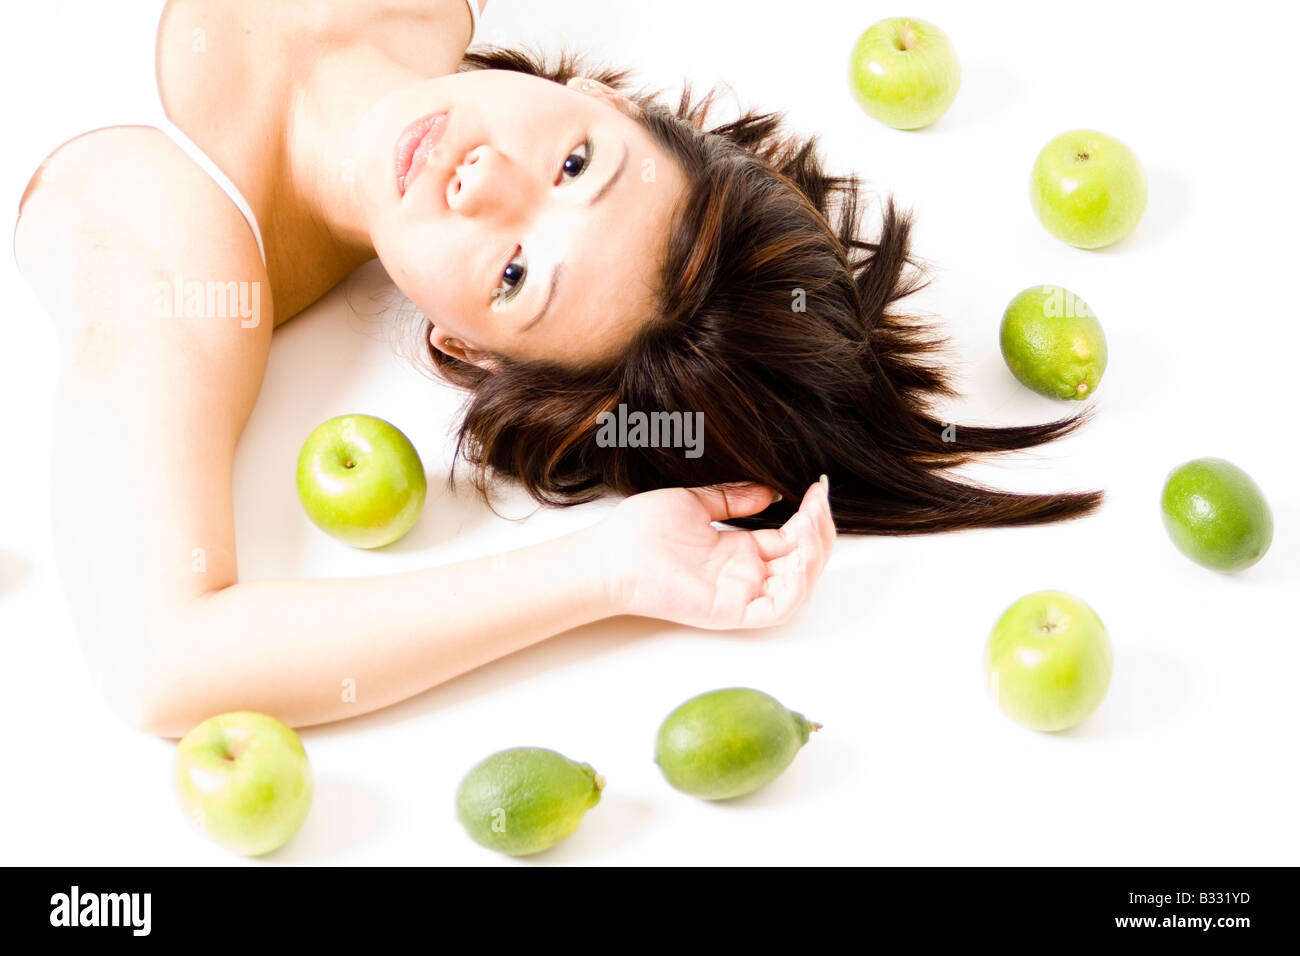 A pretty young asian woman poses with green apples and limes Stock Photo